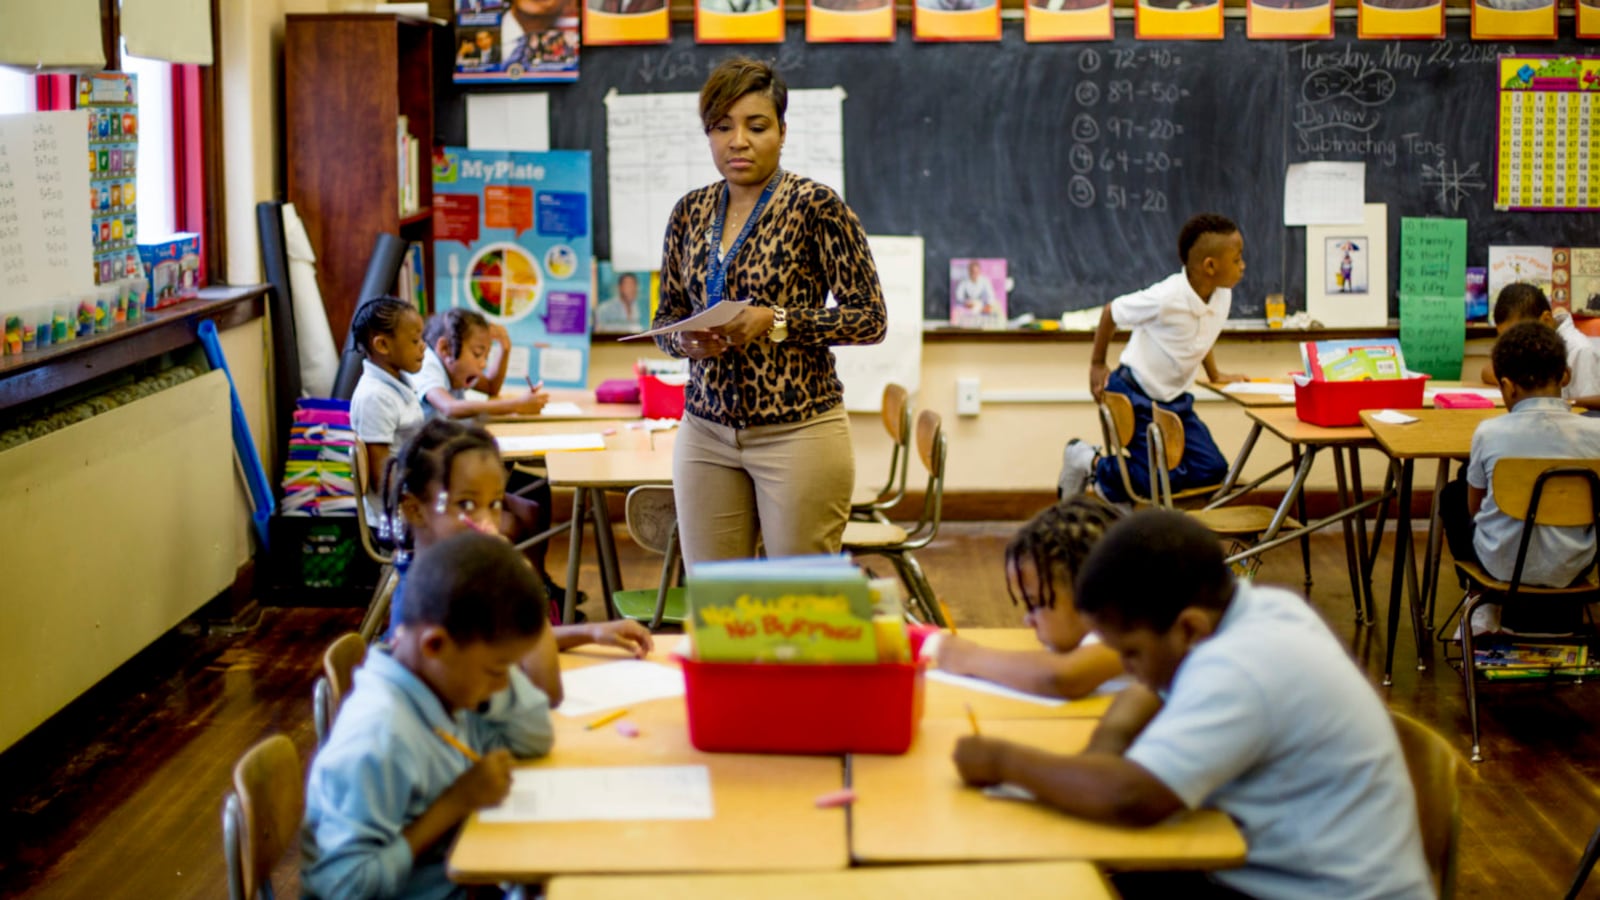 Rynell Sturkey teaches first-grade at Detroit’s Paul Robeson Malcolm X Academy. Several students work at desks around her.